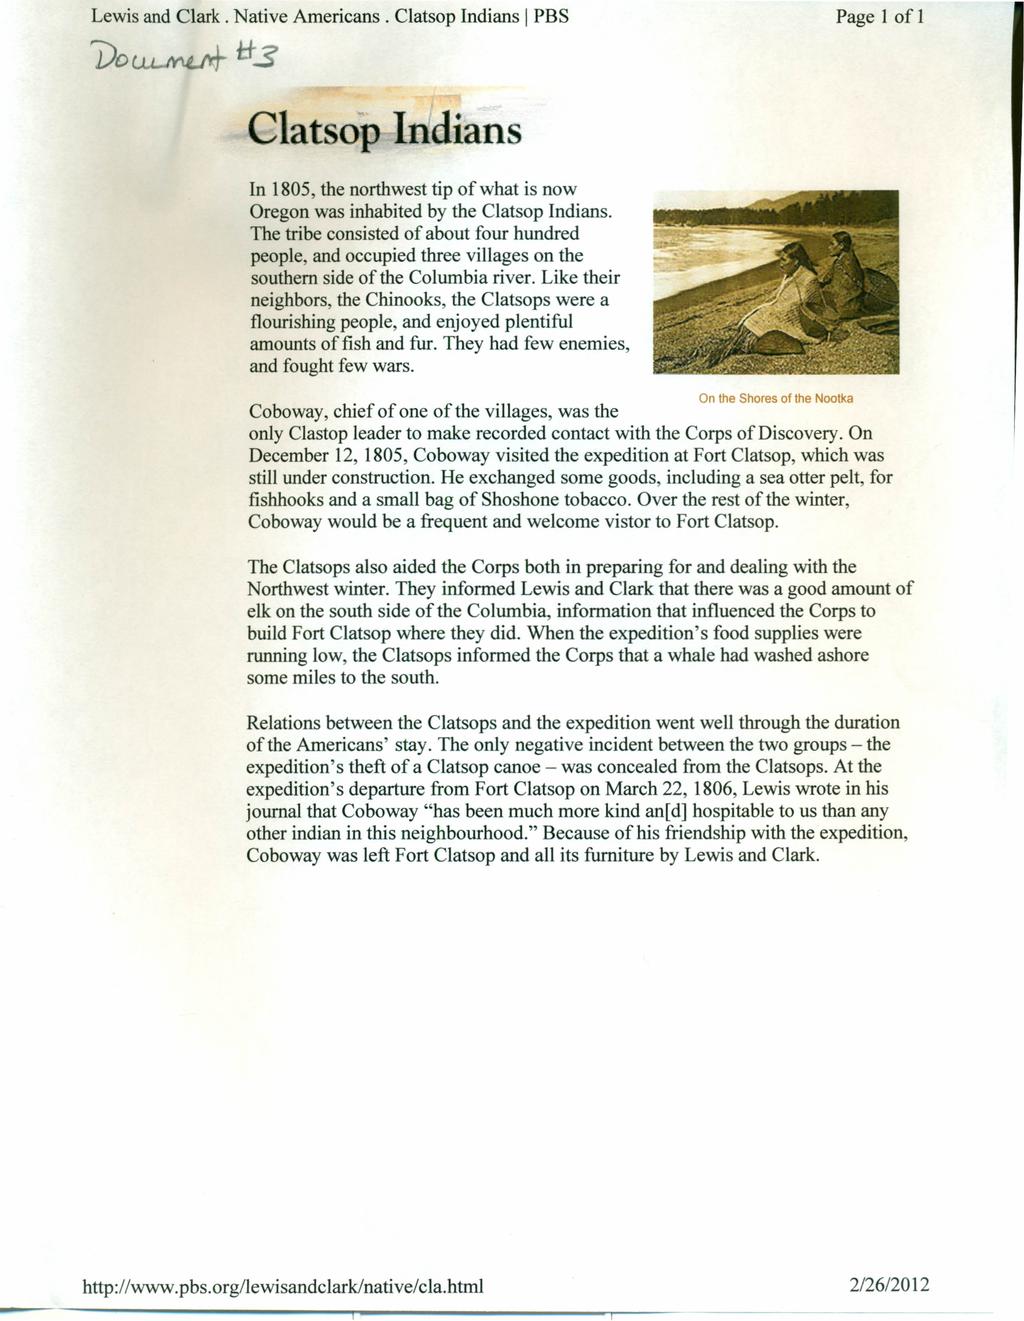 Lewis and Clark. Native Americans. Clatsop ndians PBS Page 1 of 1 C a 0 ndian n 1805, the northwest tip of what is now Oregon was inhabited by the Clatsop ndians.